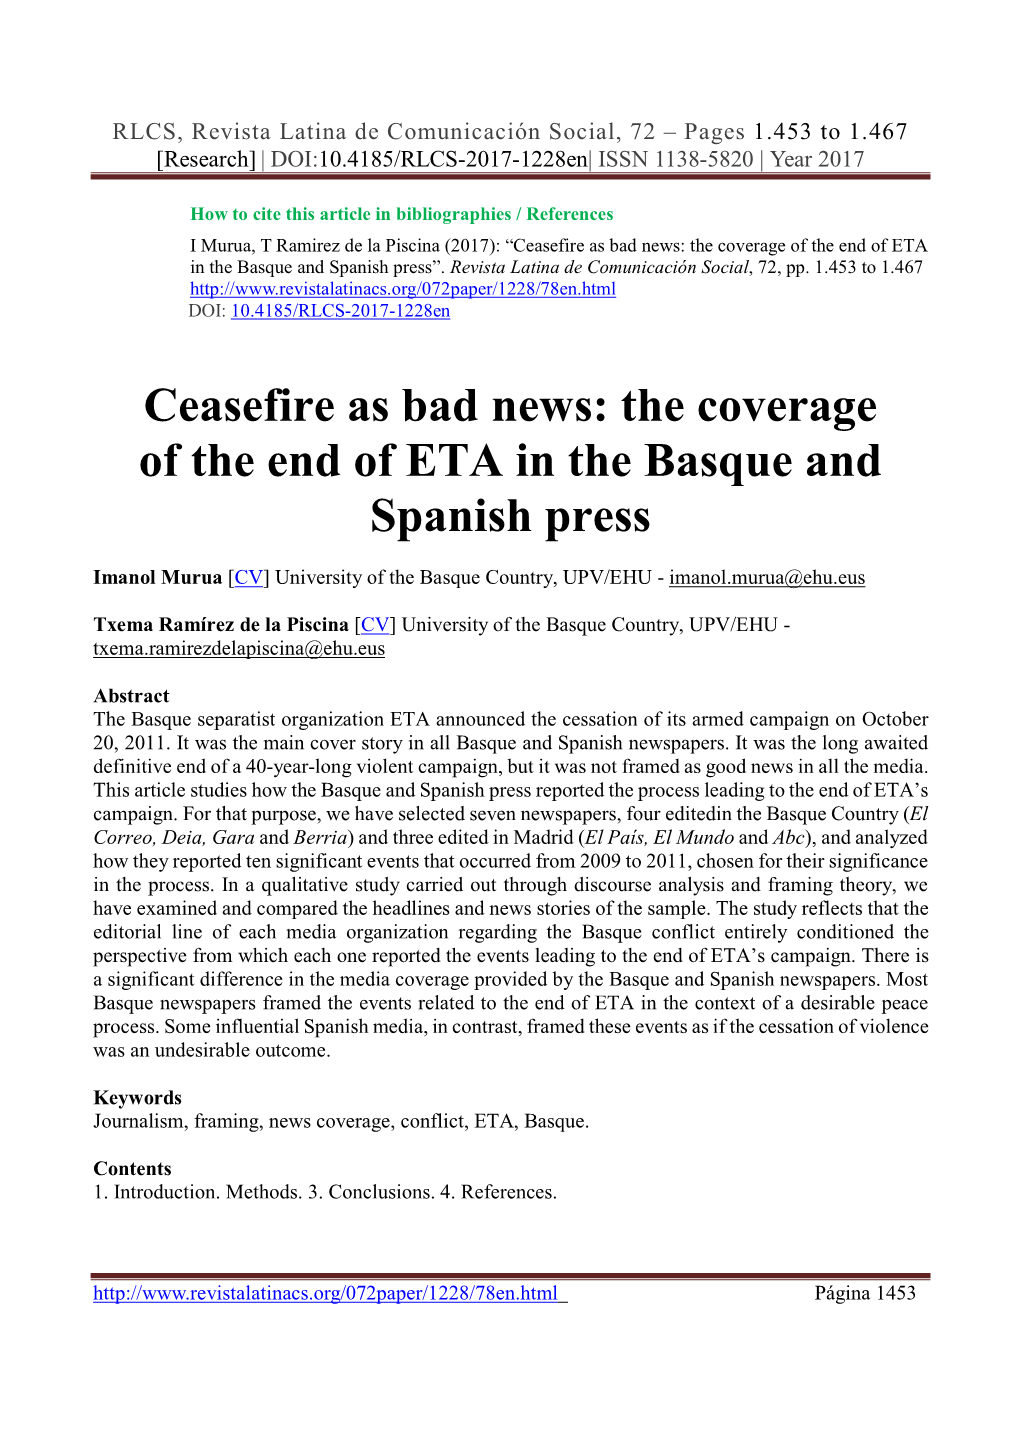 Ceasefire As Bad News: the Coverage of the End of ETA in the Basque and Spanish Press”